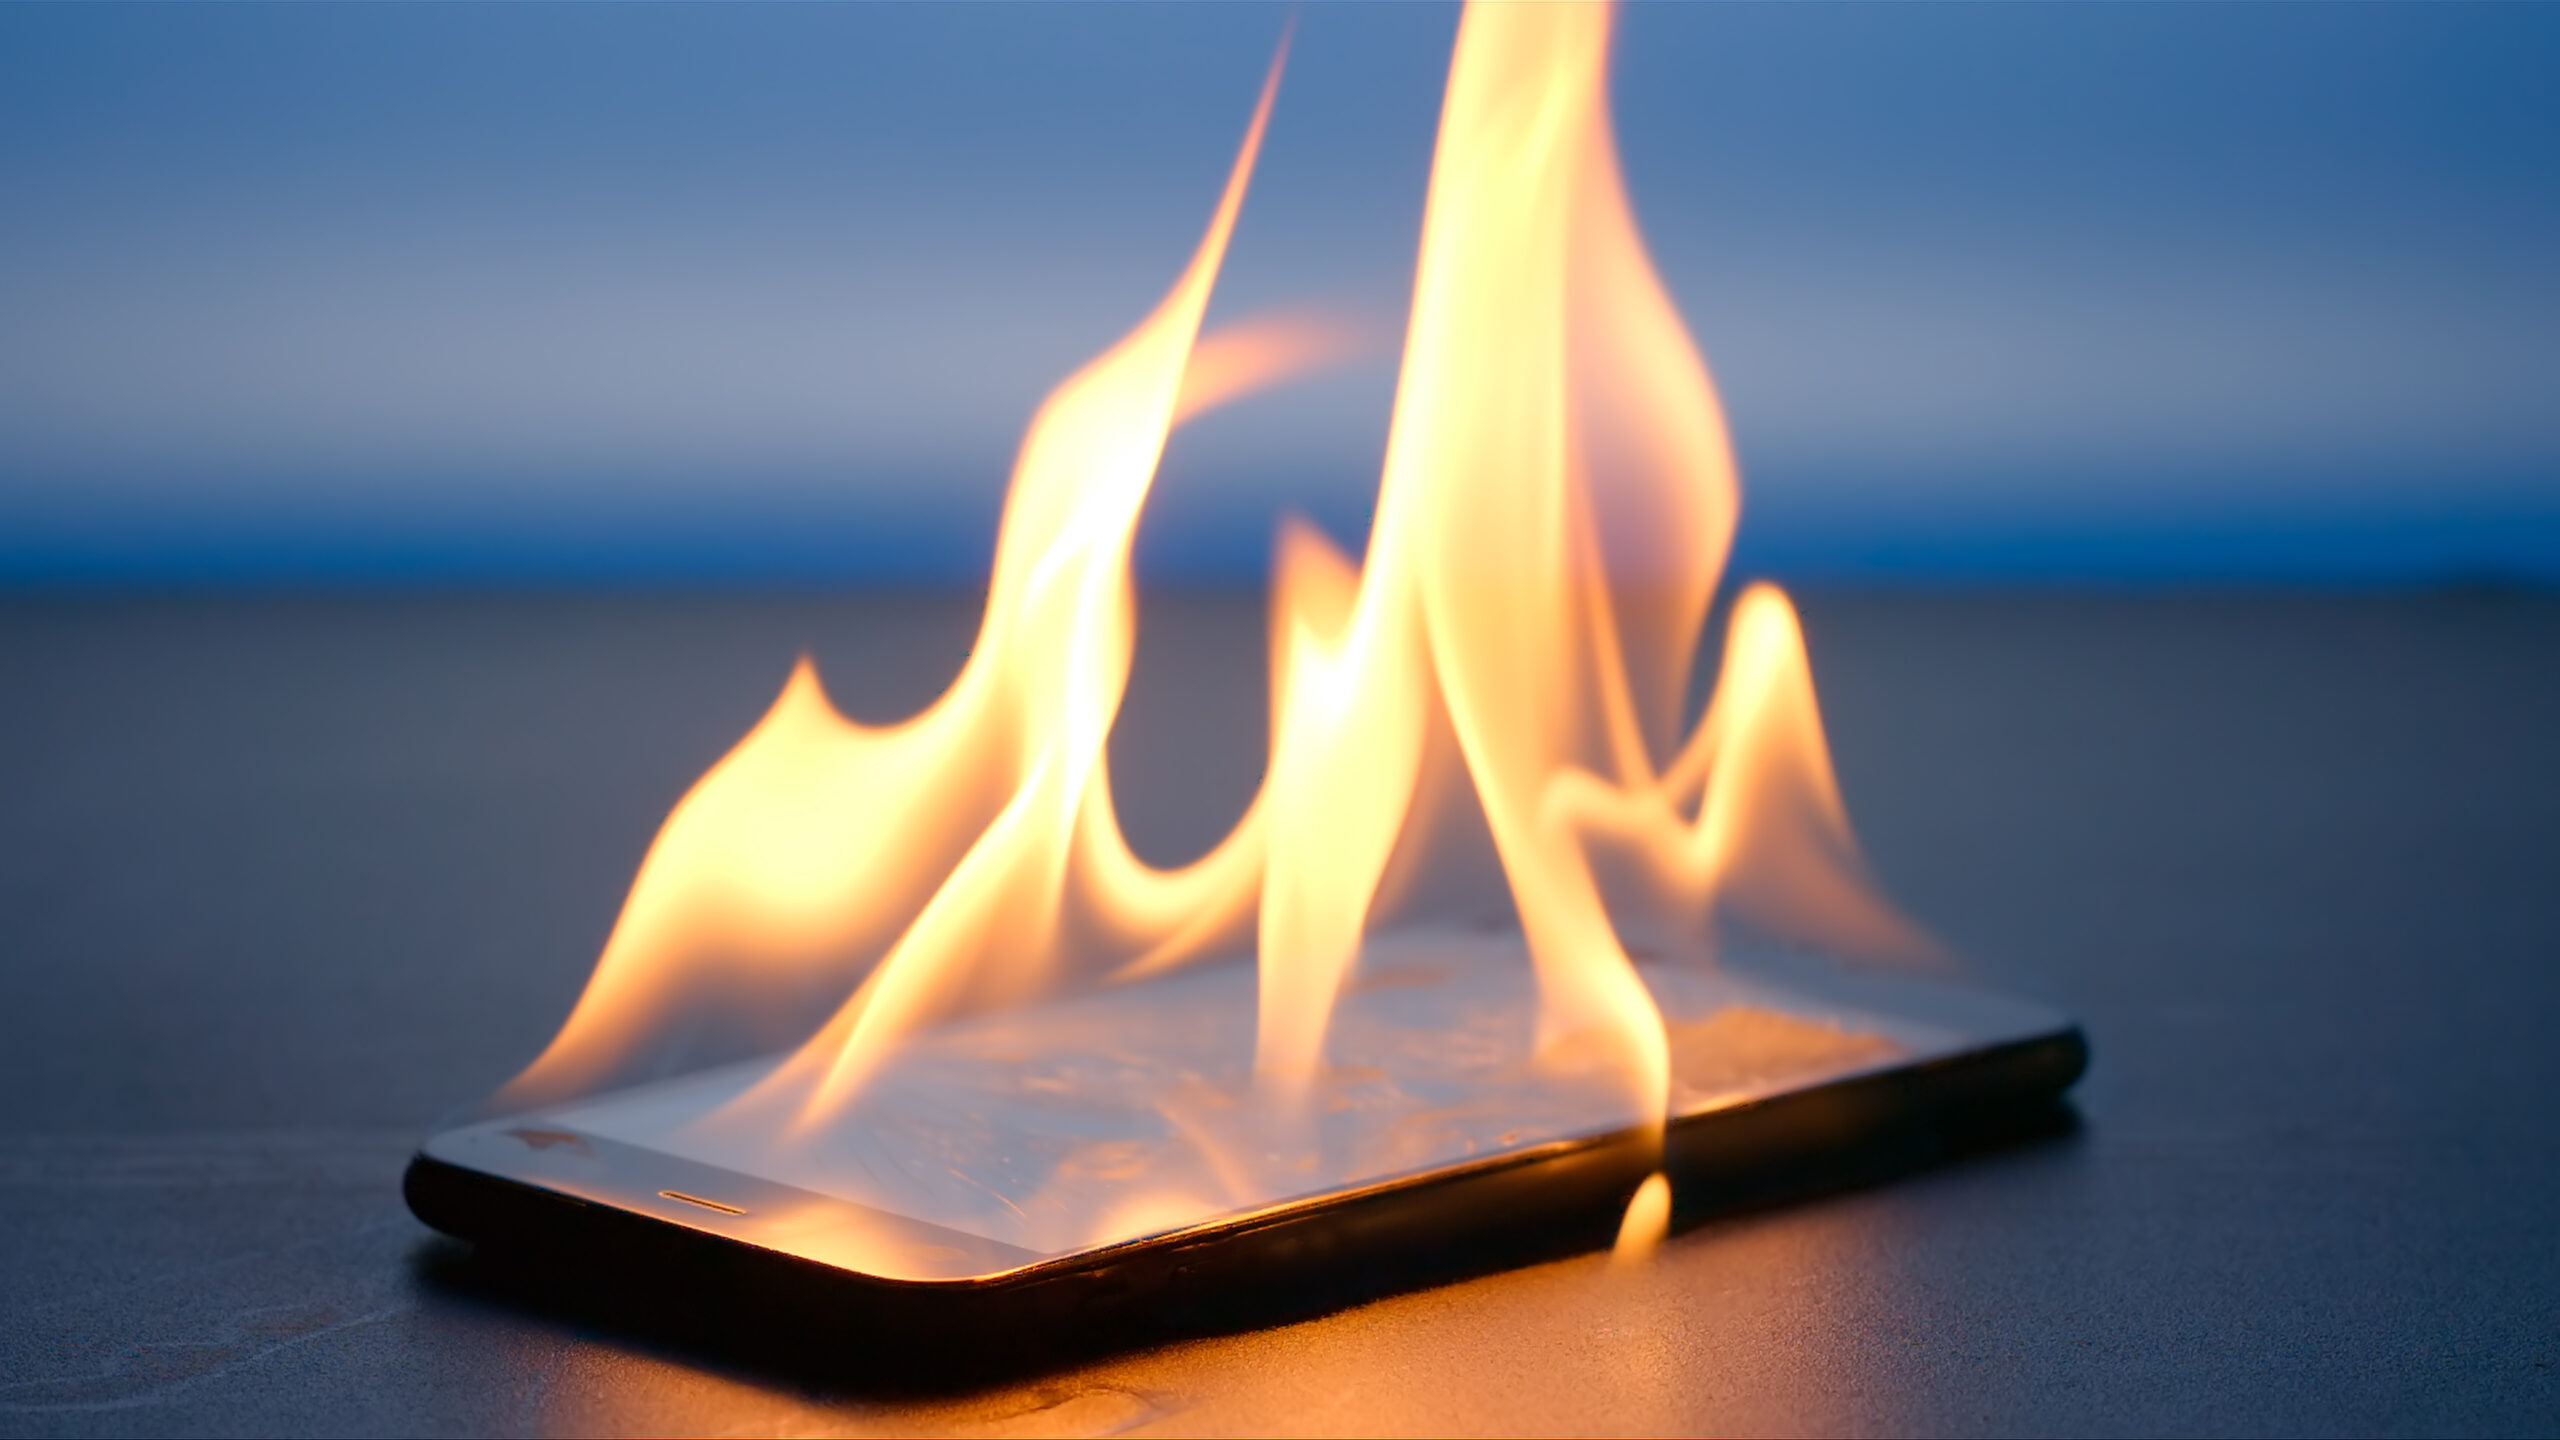 Smartphone is burning on a table on a blue background